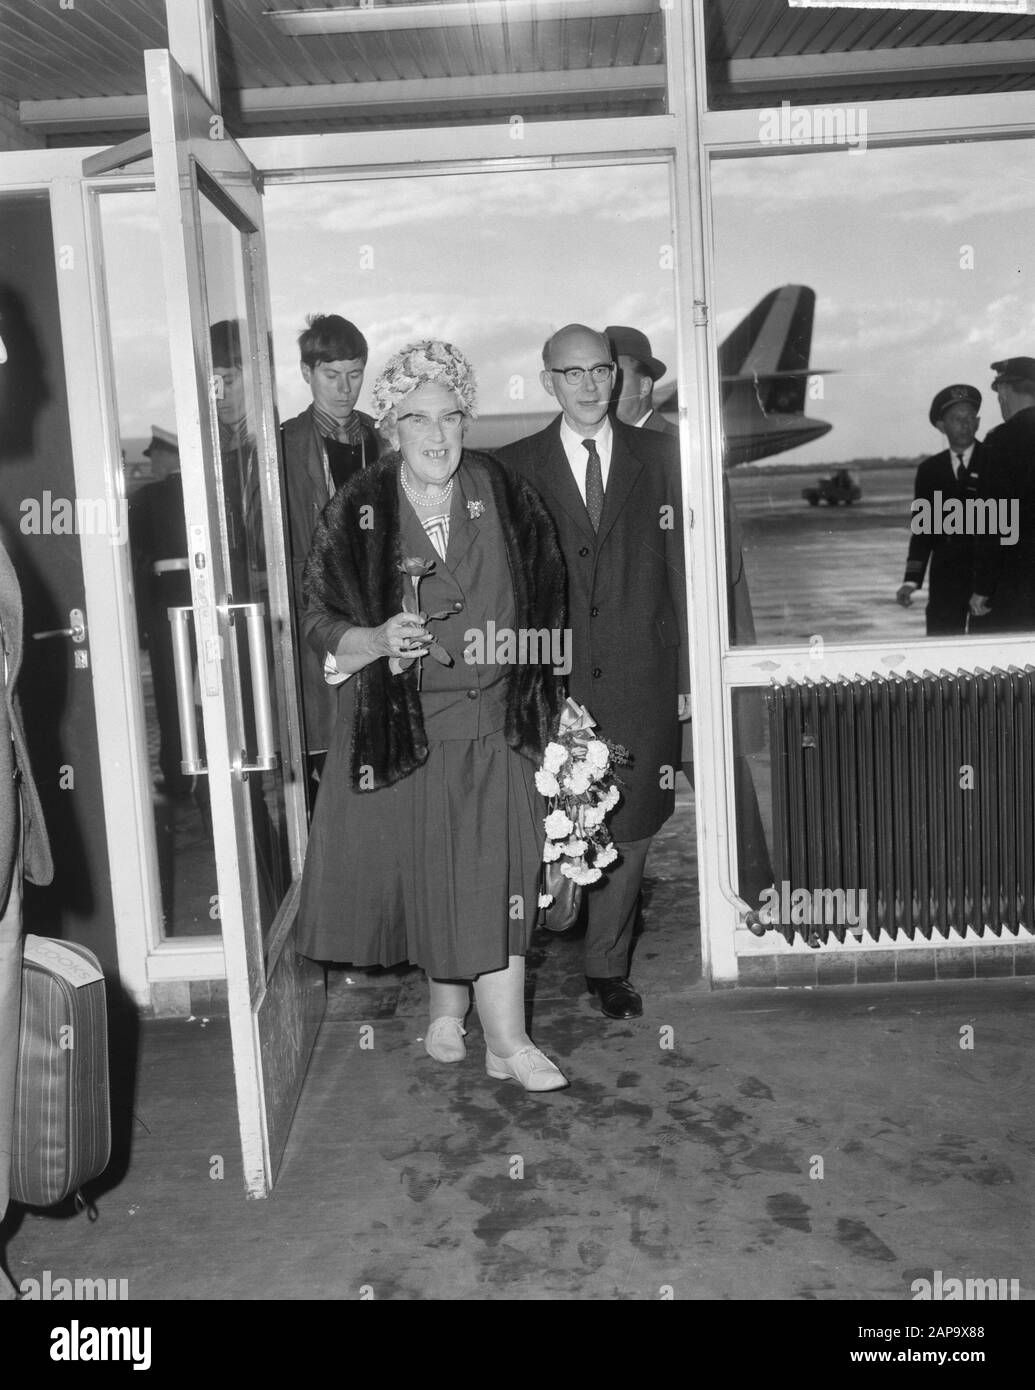 Agatha Christie in the Netherlands (detective writer), upon arrival at Schiphol Airport with rose in her hand Date: September 17, 1964 Location: Noord-Holland, Schiphol Keywords: arrivals Personal name : Agatha Christie Stock Photo